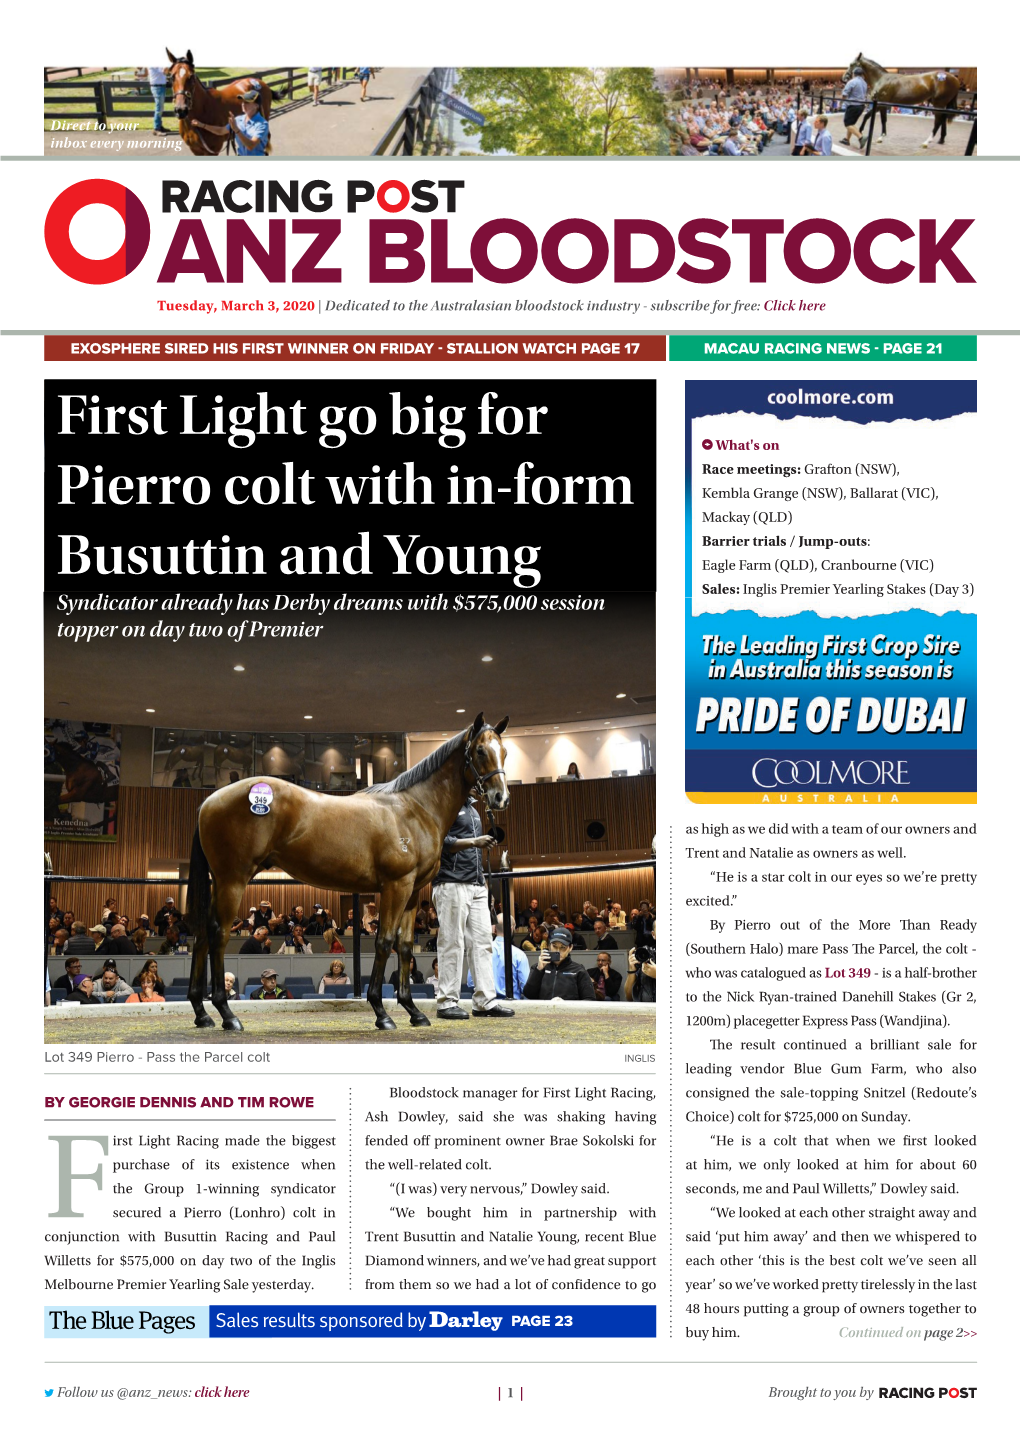 First Light Go Big for Pierro Colt with In-Form Busuttin and Young | 2 | Tuesday, March 3, 2020